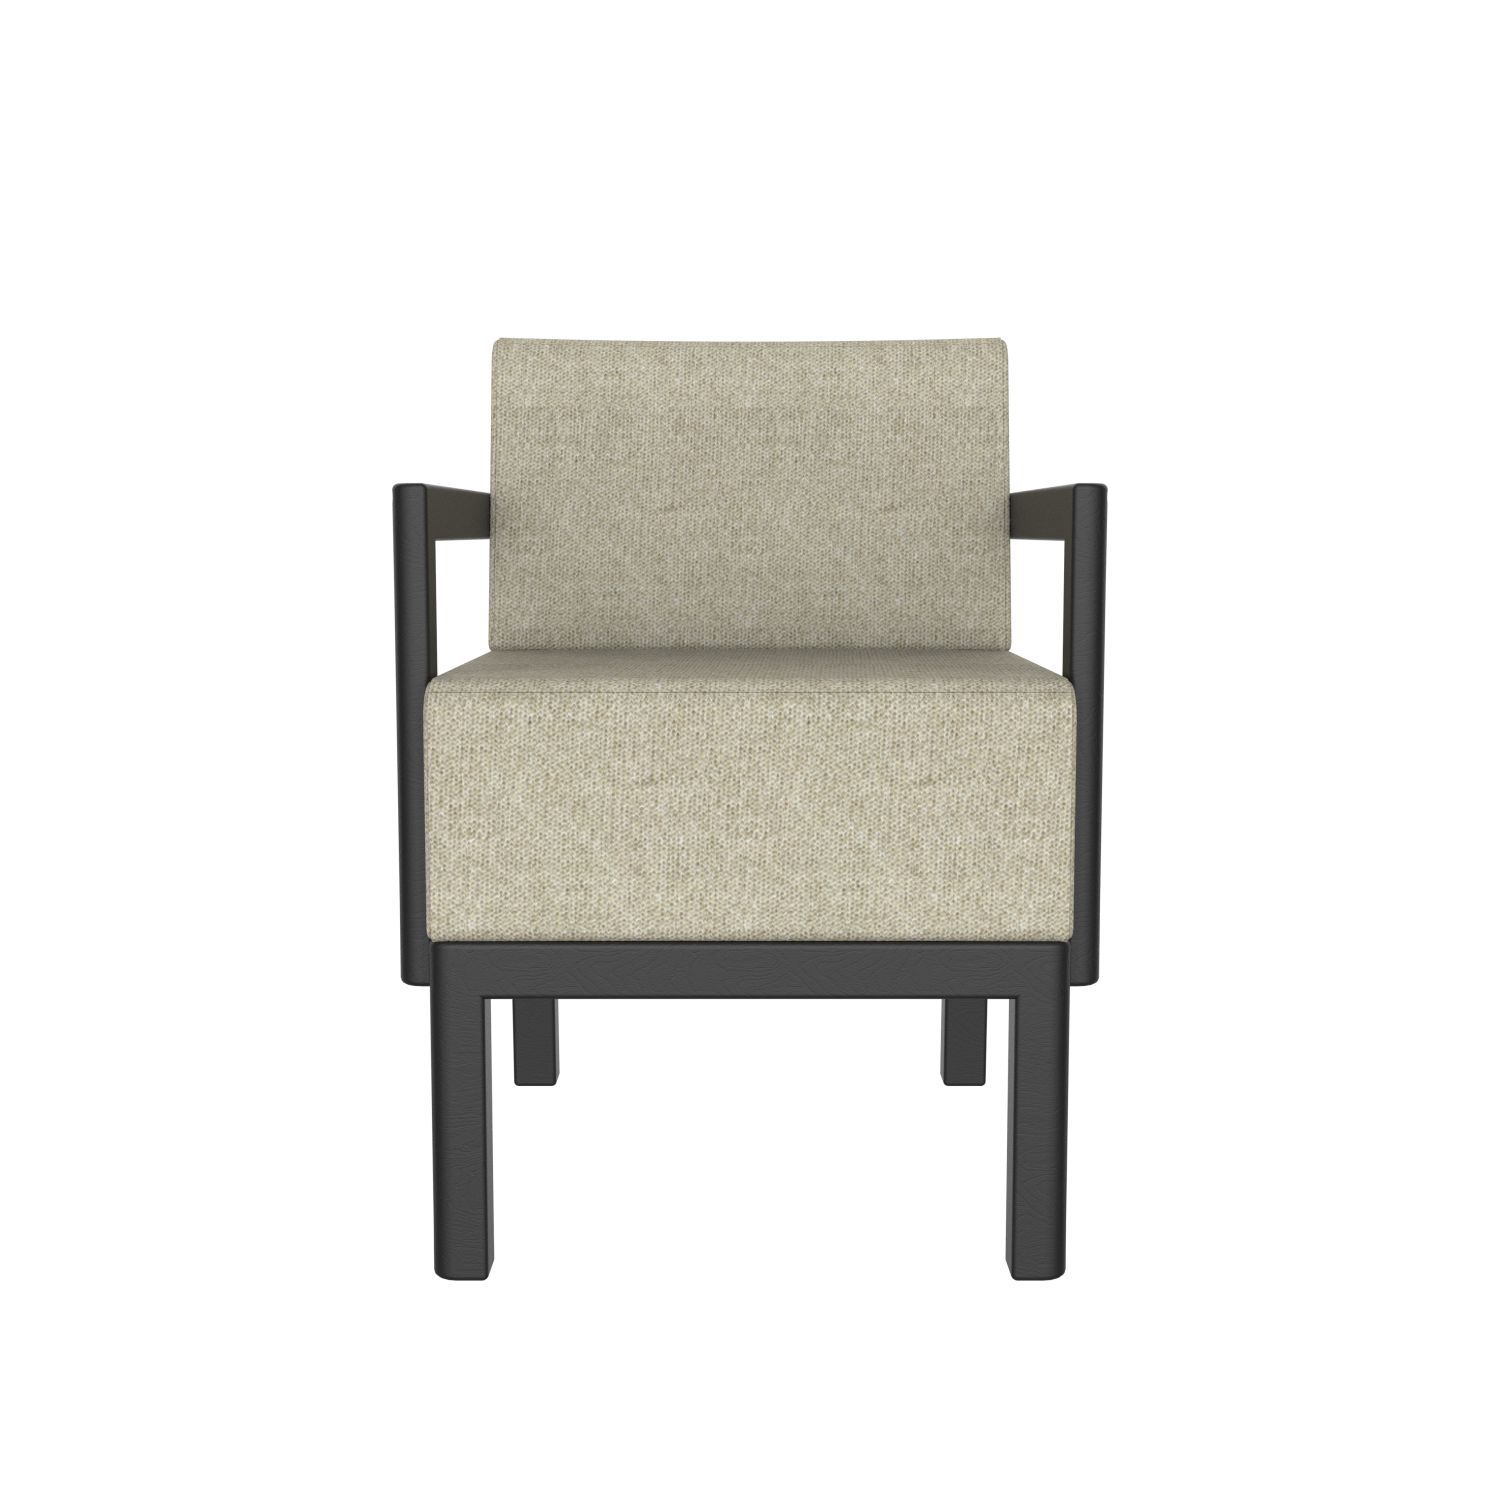 lensvelt piet boon chair 02 with armrests moss stone grey 11 price level 2 black ral9005 hard leg ends